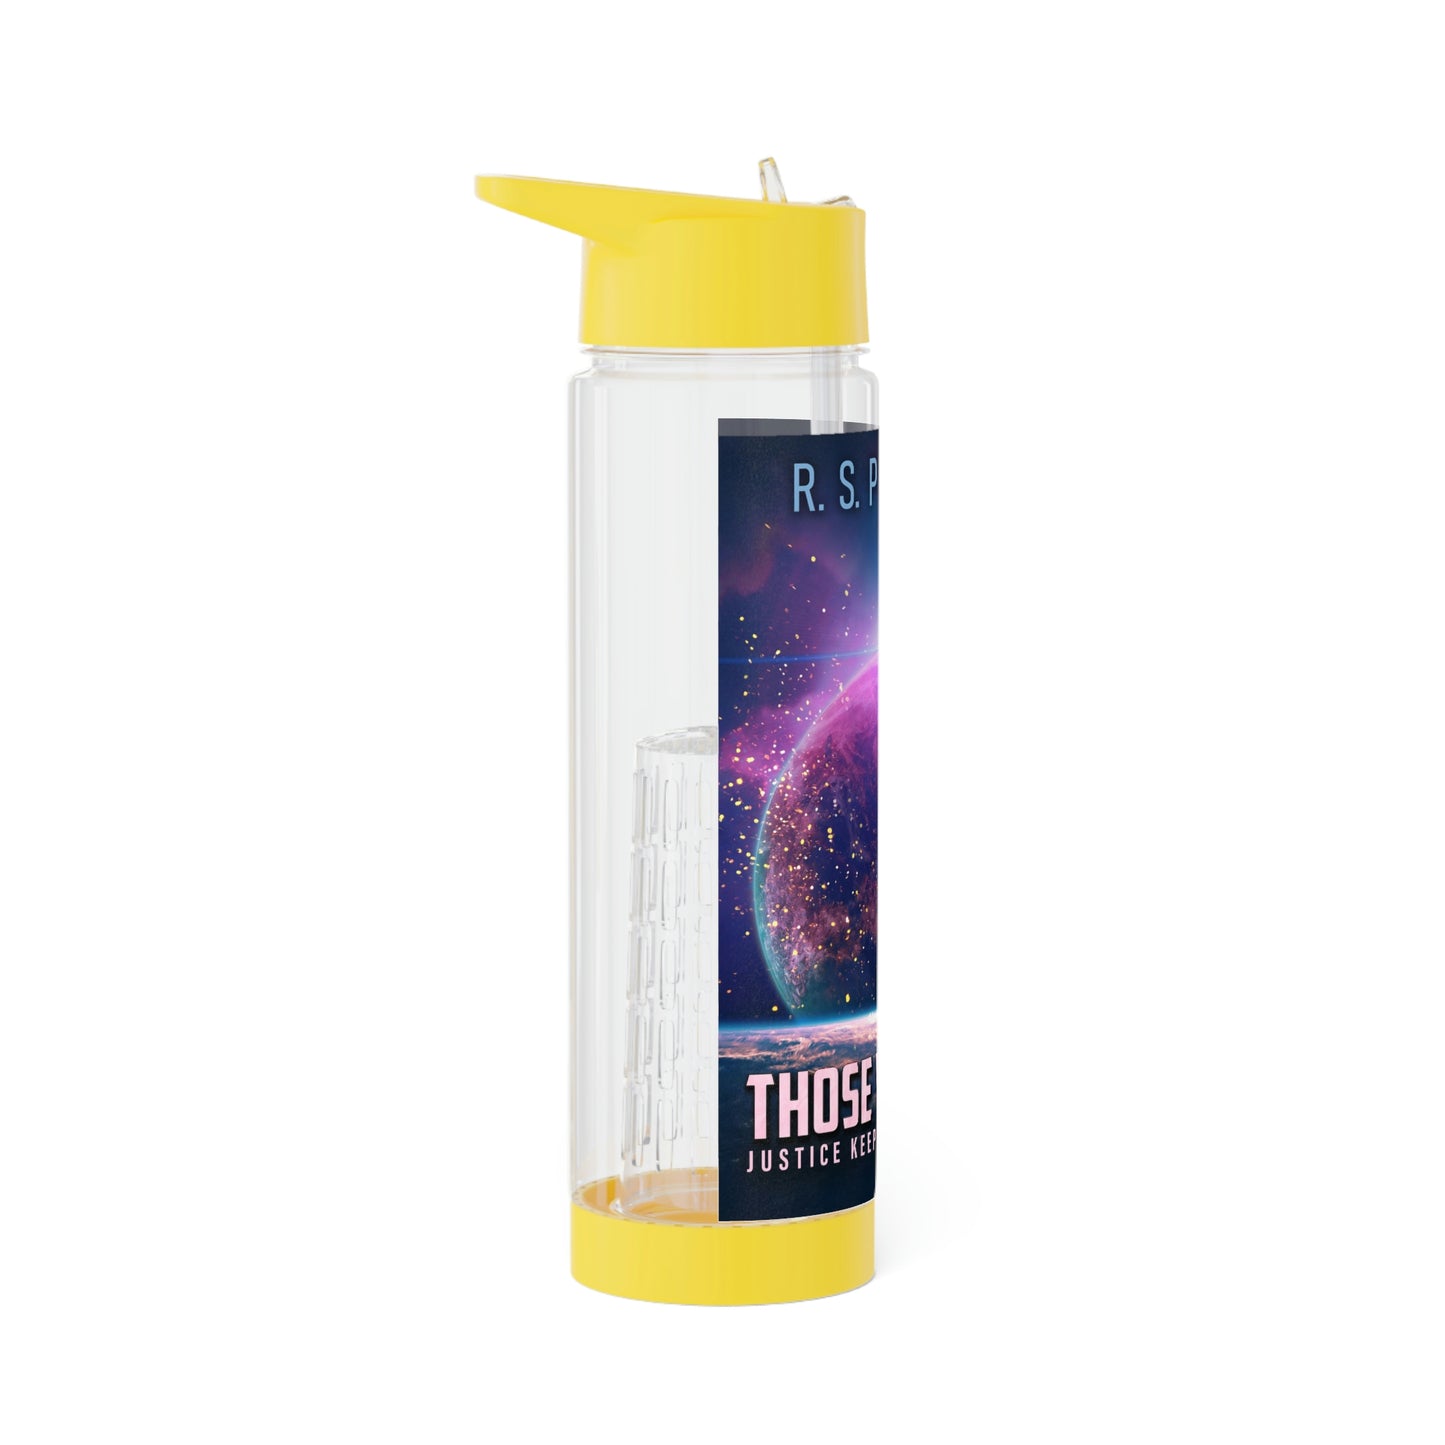 Those Who Rise - Infuser Water Bottle